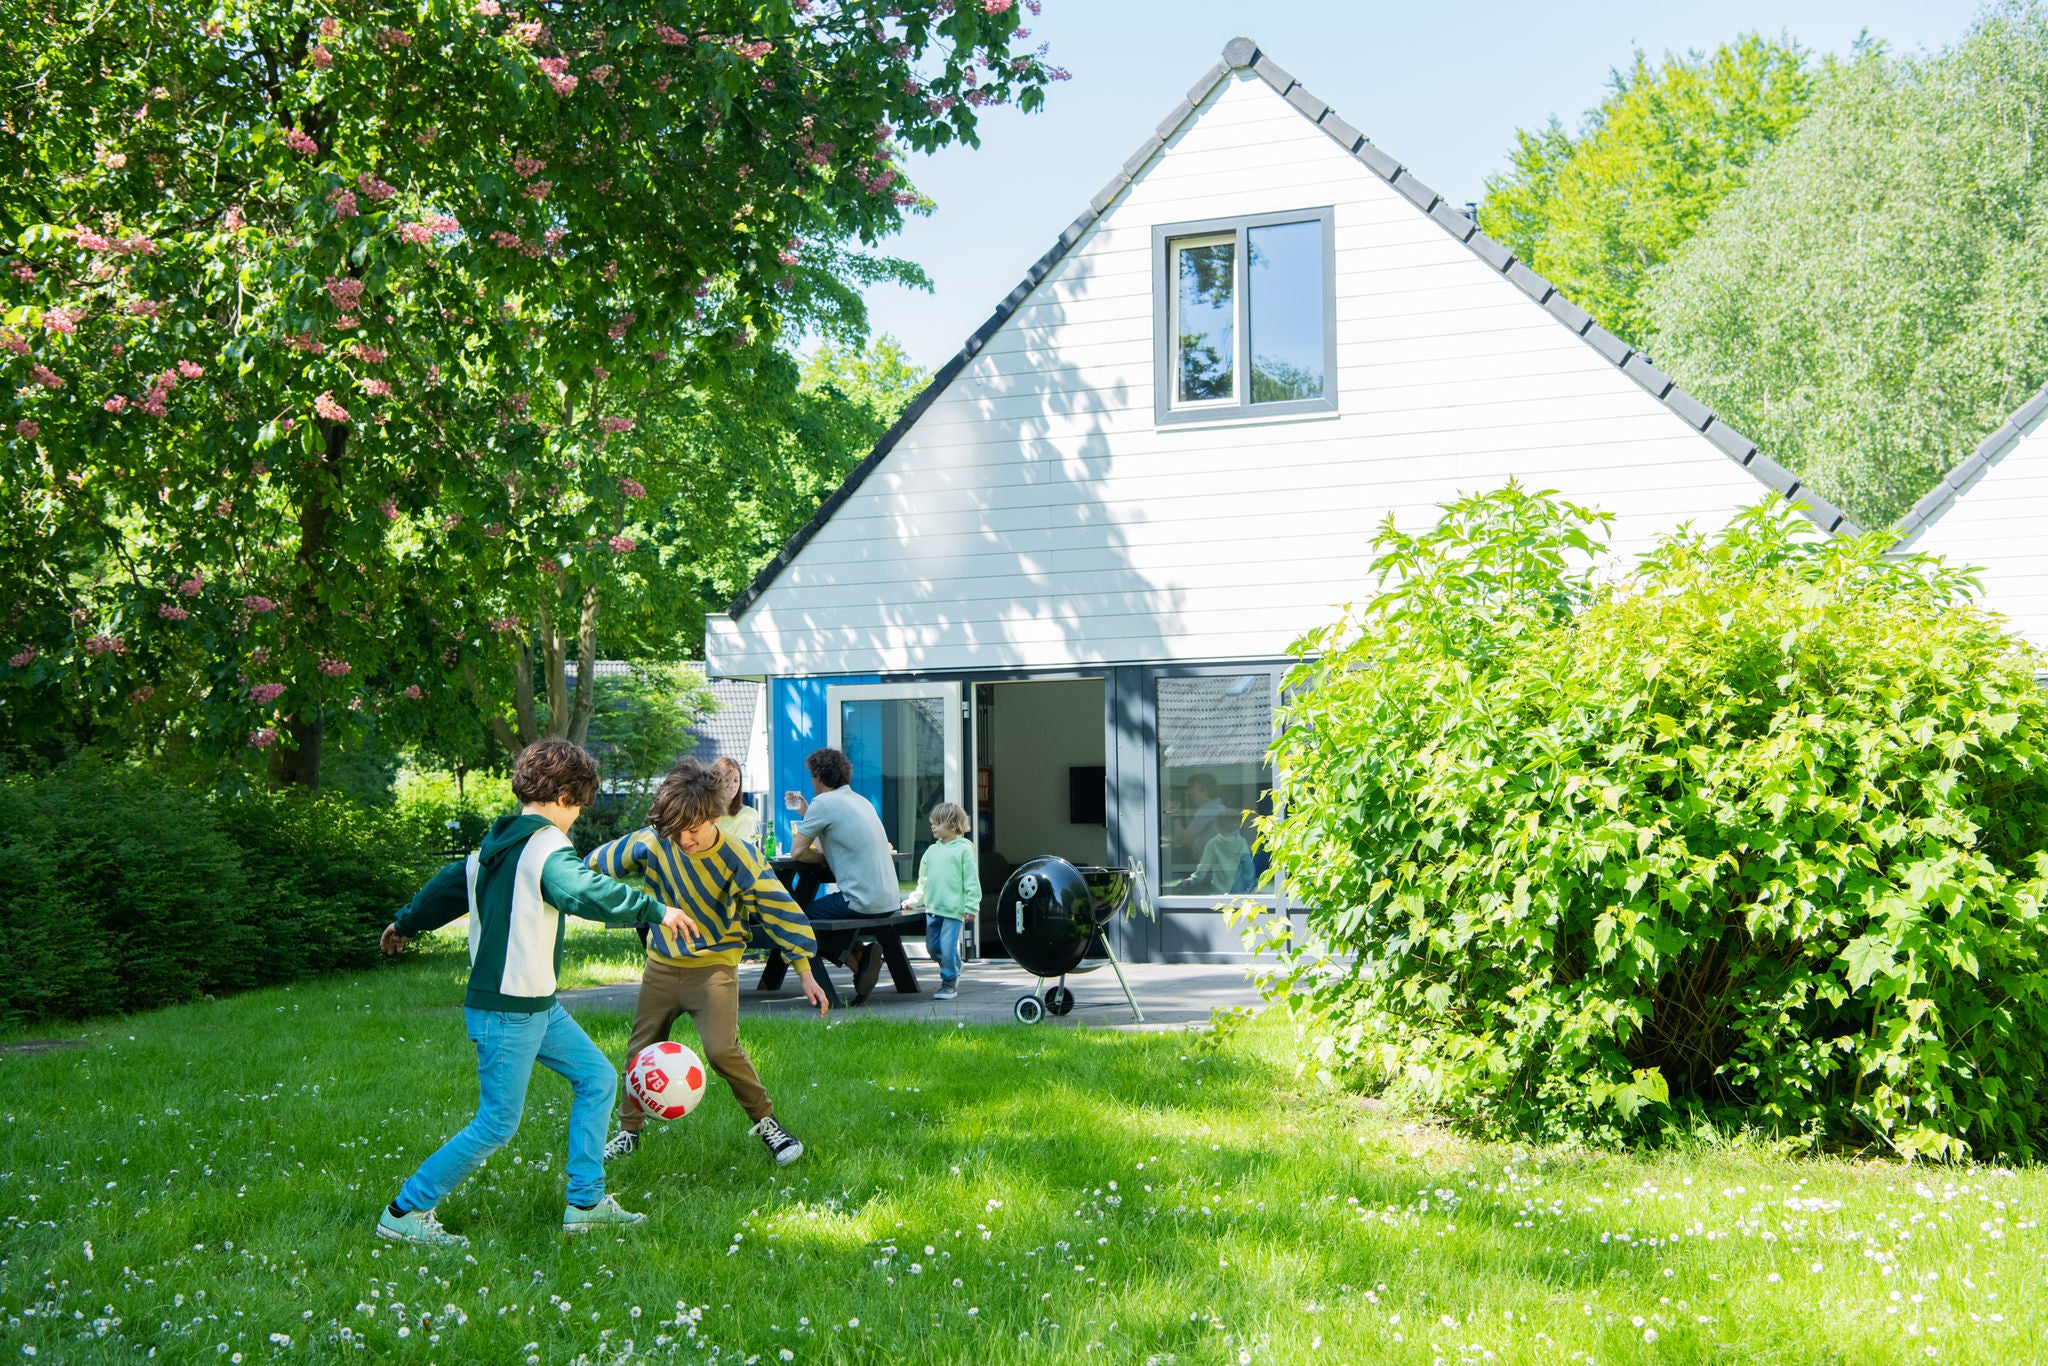 Enjoy together in an 8-person cottage at Walibi Village.